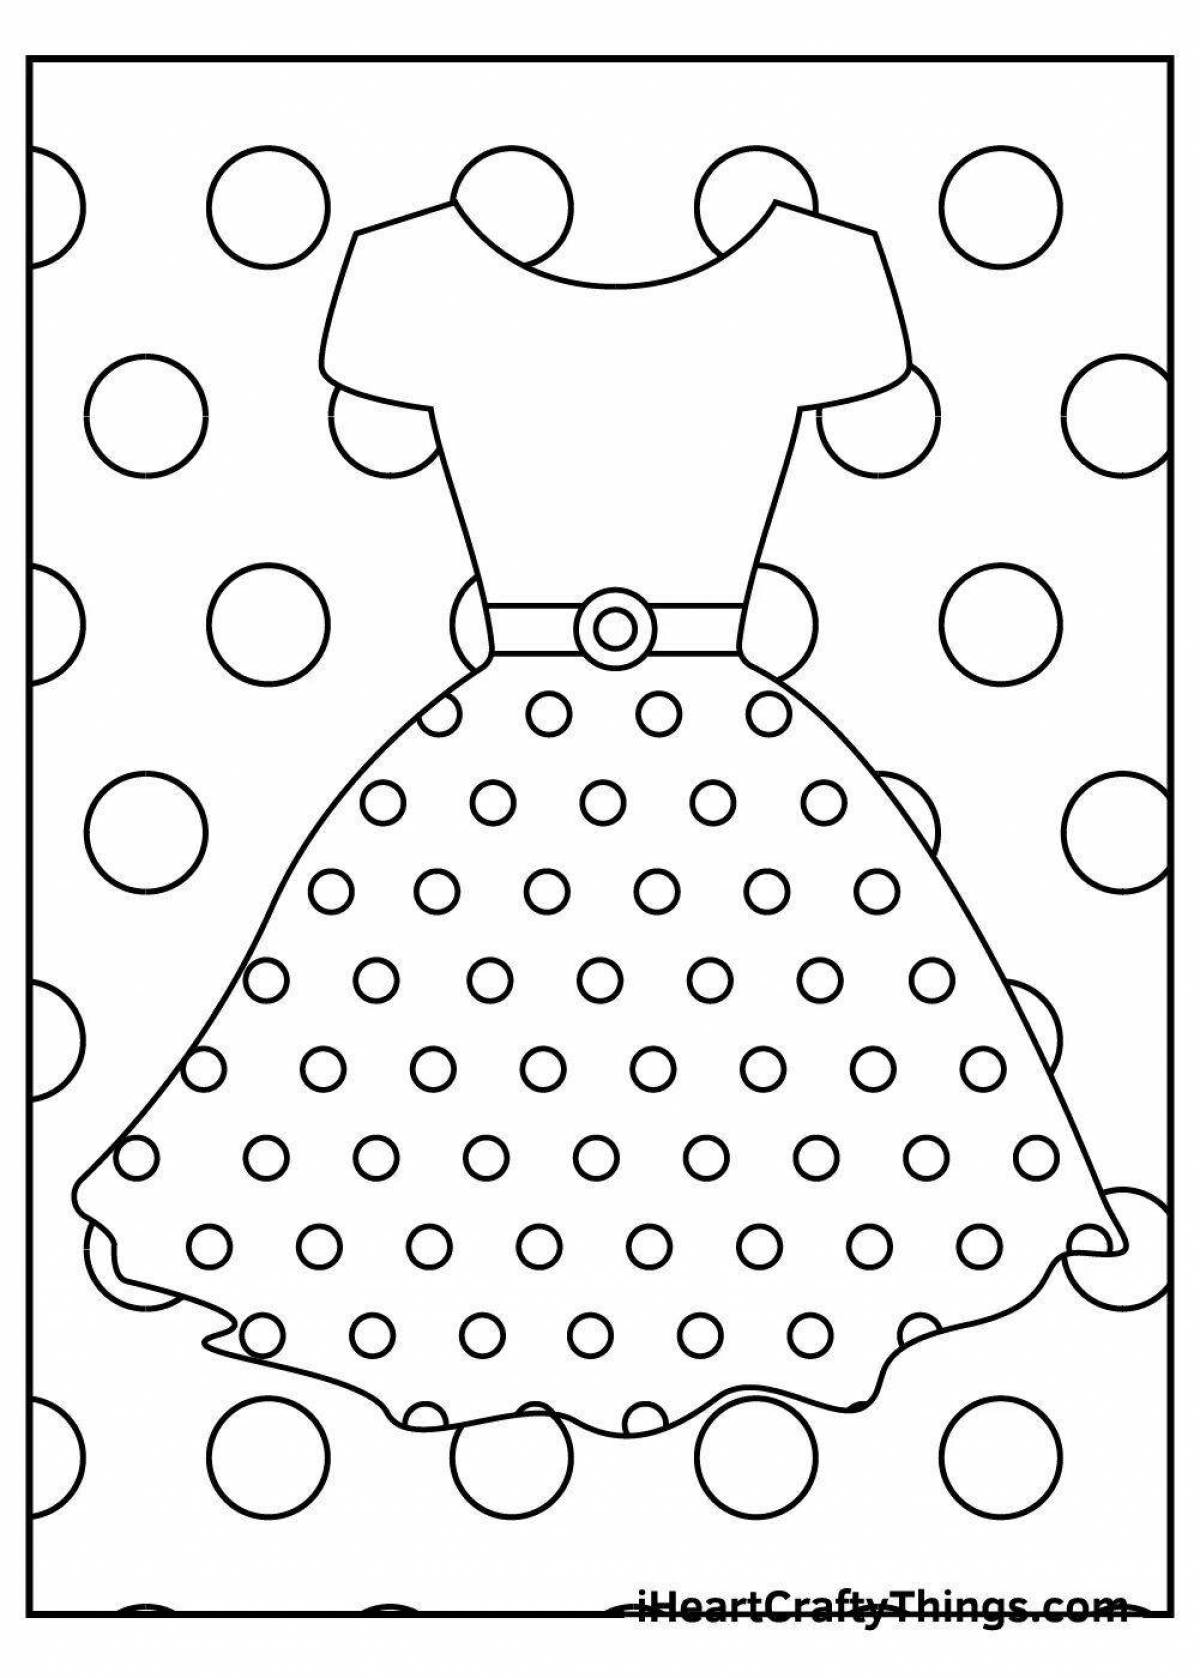 Coloring book perfect dress for toddlers